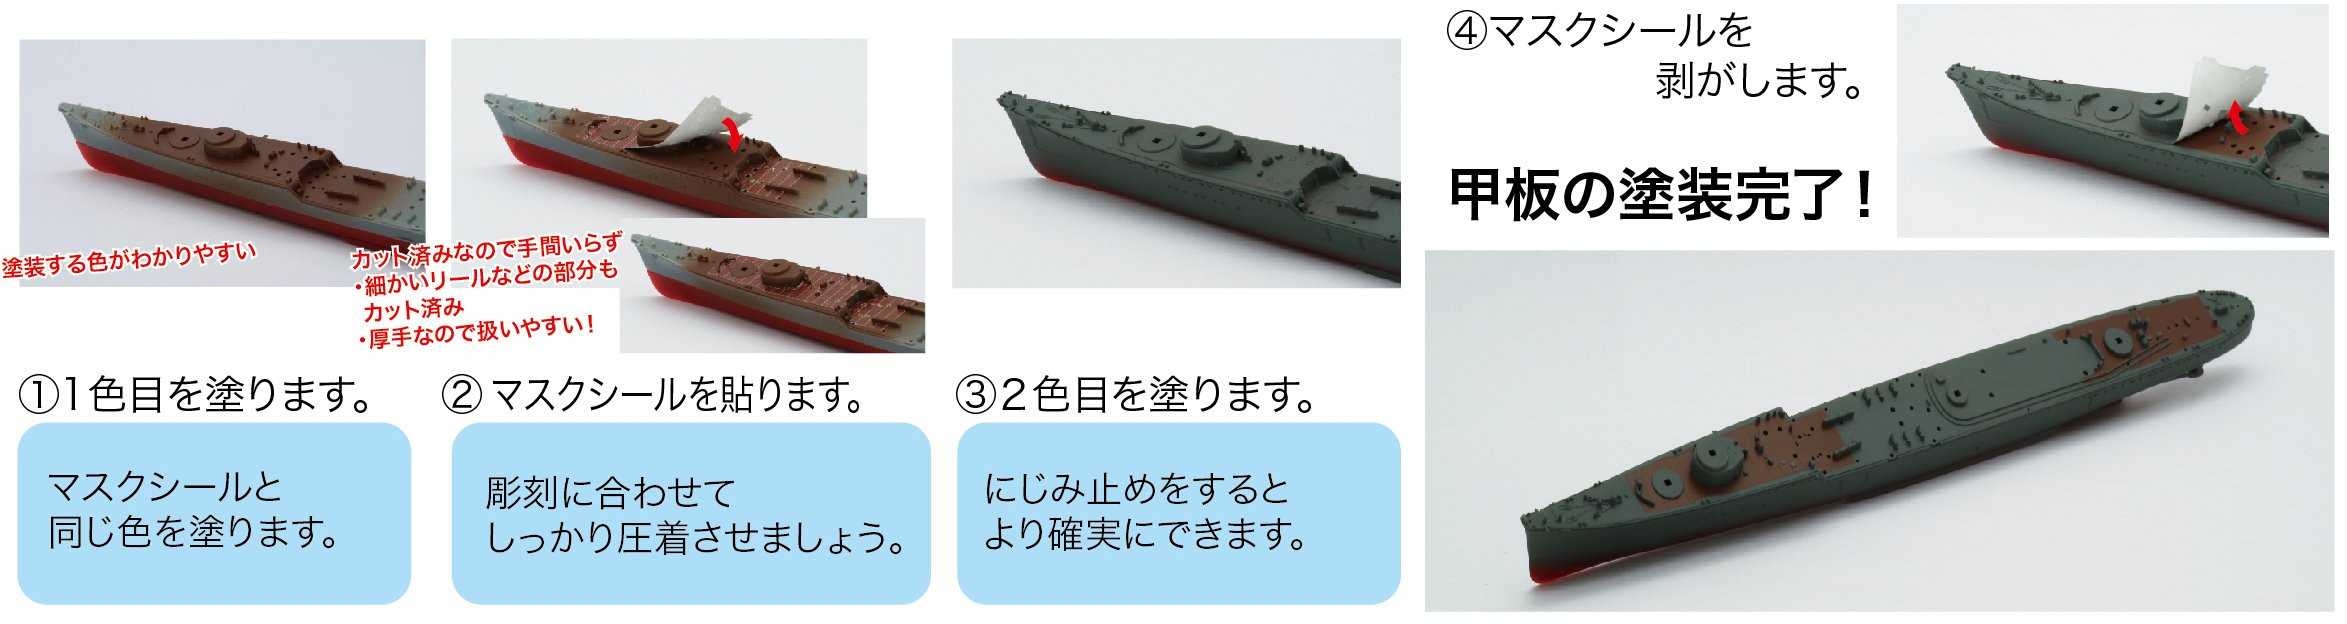 Fujimi Model 1/700 Special Series Spot No. 83 Japanese Navy High Speed ​​Battleship Kongo October 1944 With Pre-Cut Mask Seal Plastic Model Special Sp83